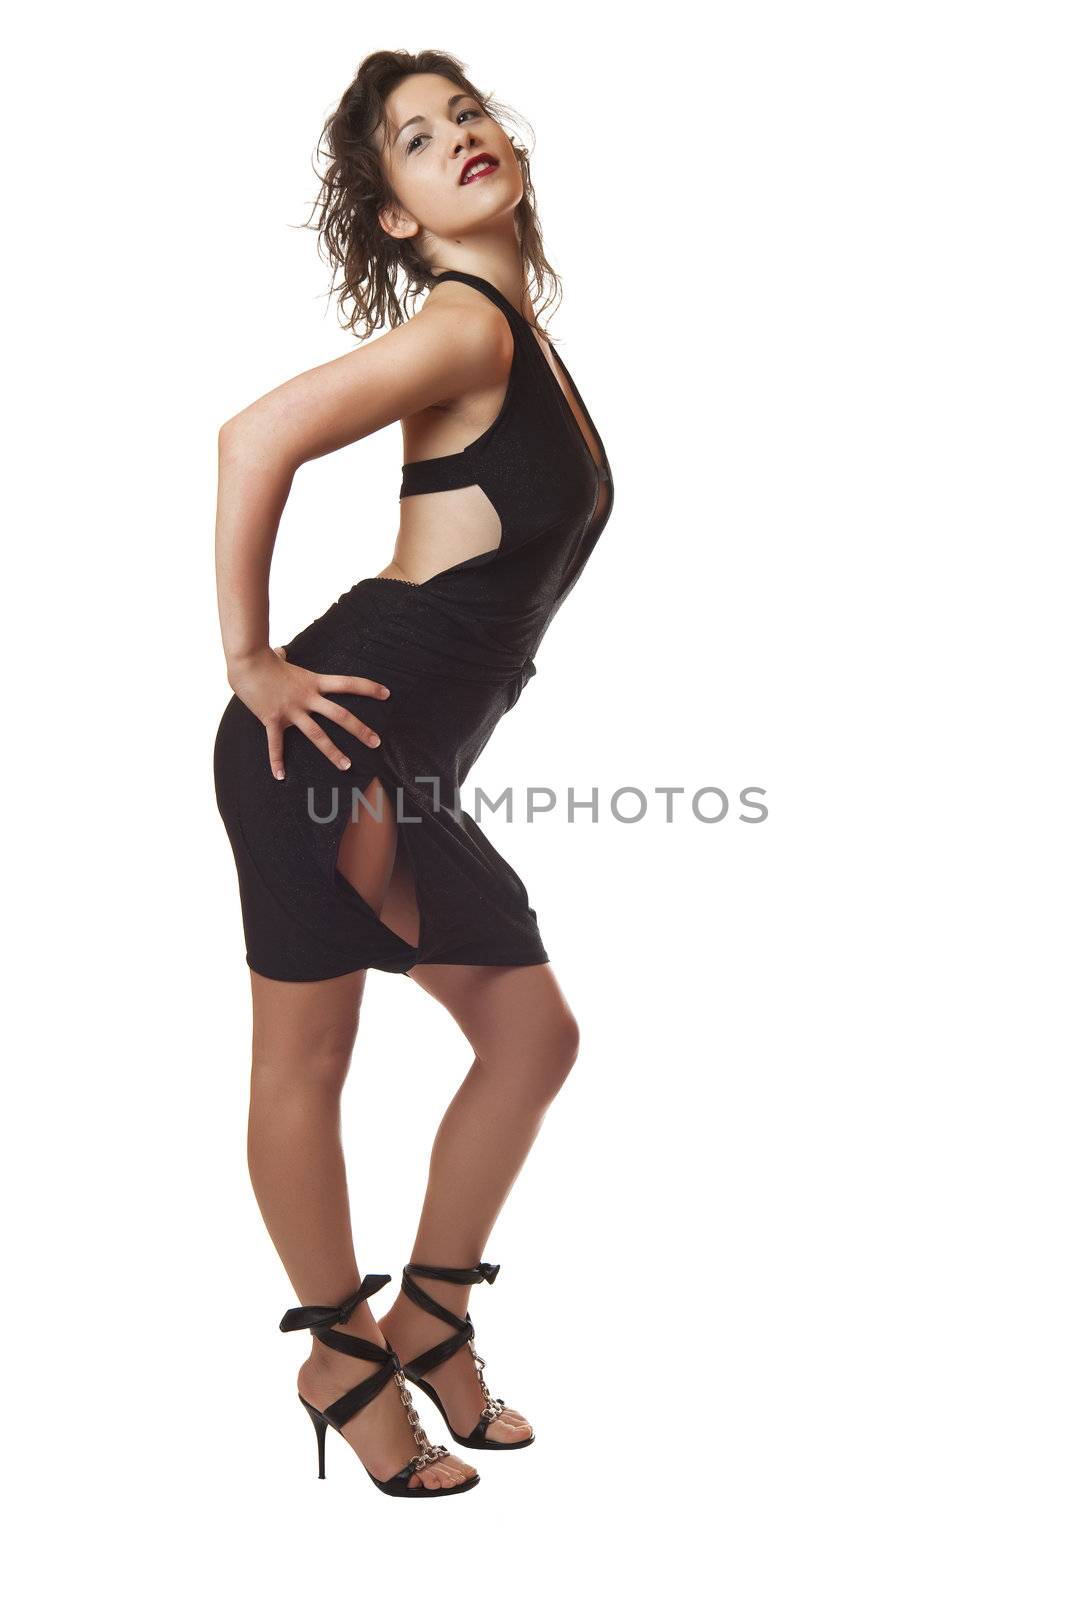 Sexy attractive young woman in black dress and high hills posing and smiling, , isolated on white background